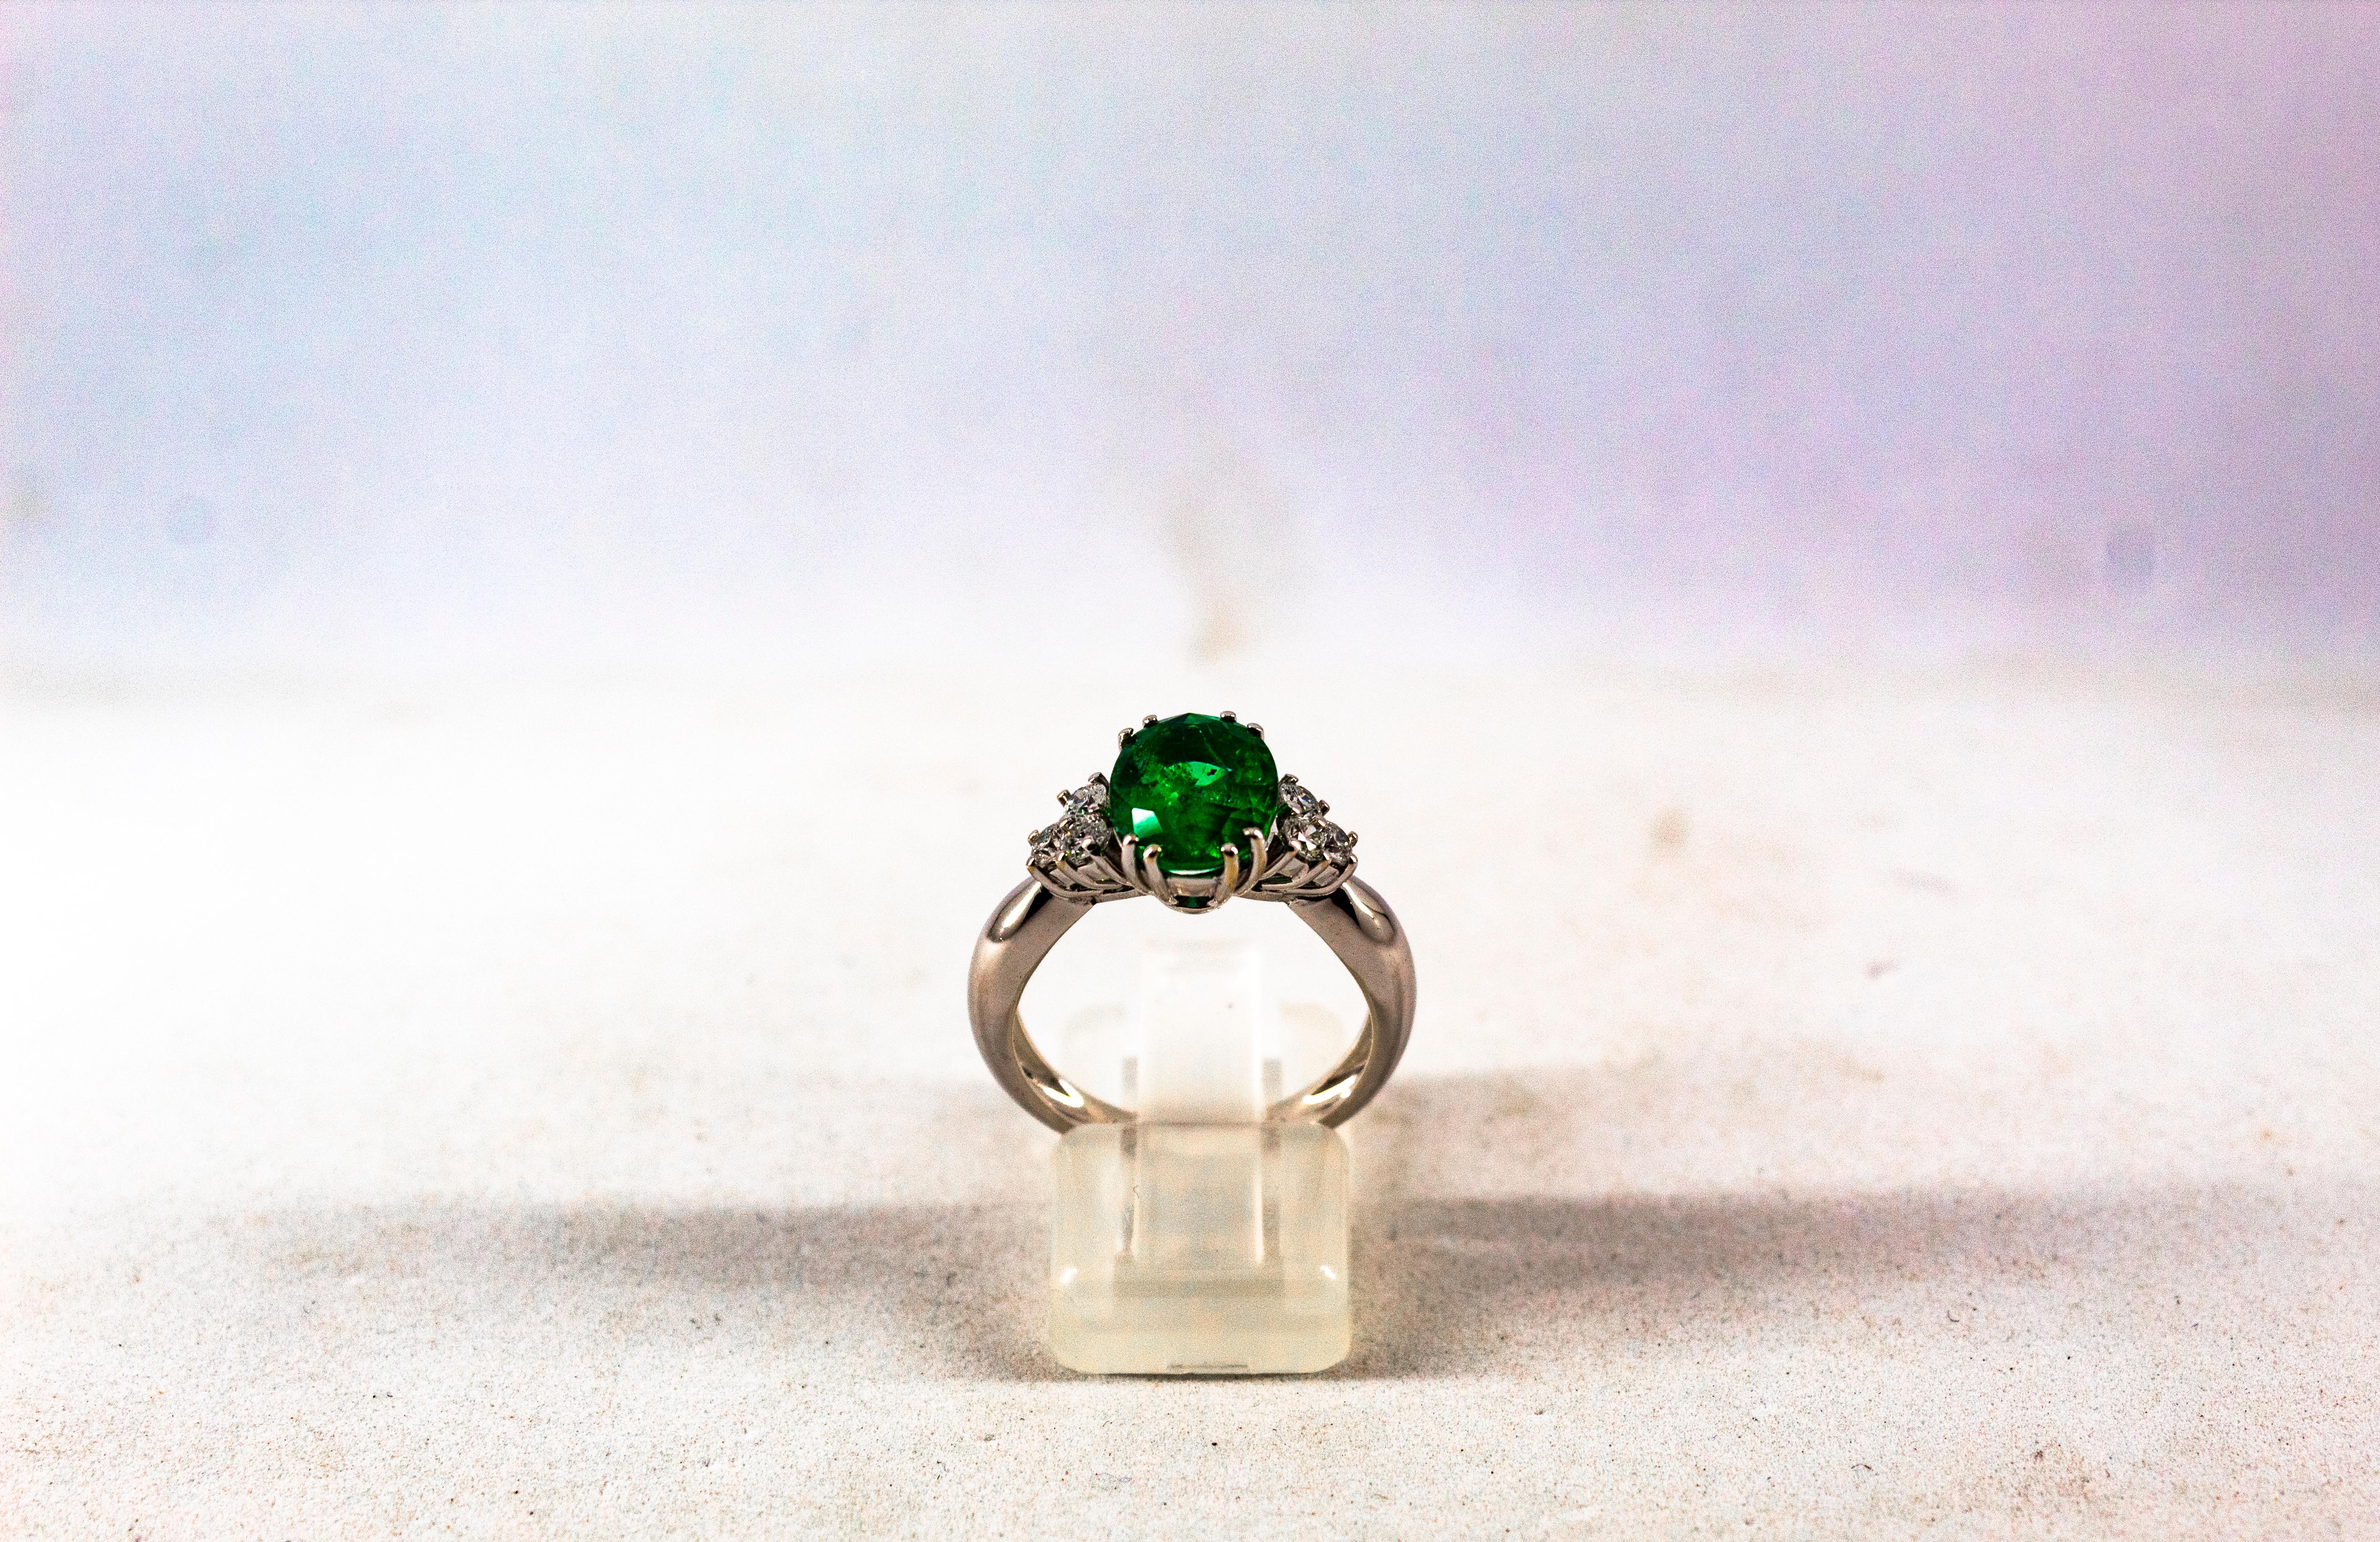 This Ring is made of 18K White Gold.
This Ring has 0.35 Carats of White Modern Round Cut Diamonds. Color: H-G Clarity: VVS1
This Ring has a 2.43 Carats Natural Zambia Oval Cut Emerald.
This Ring is inspired by Art Deco.
Size ITA: 14.5 USA: 7
We're a